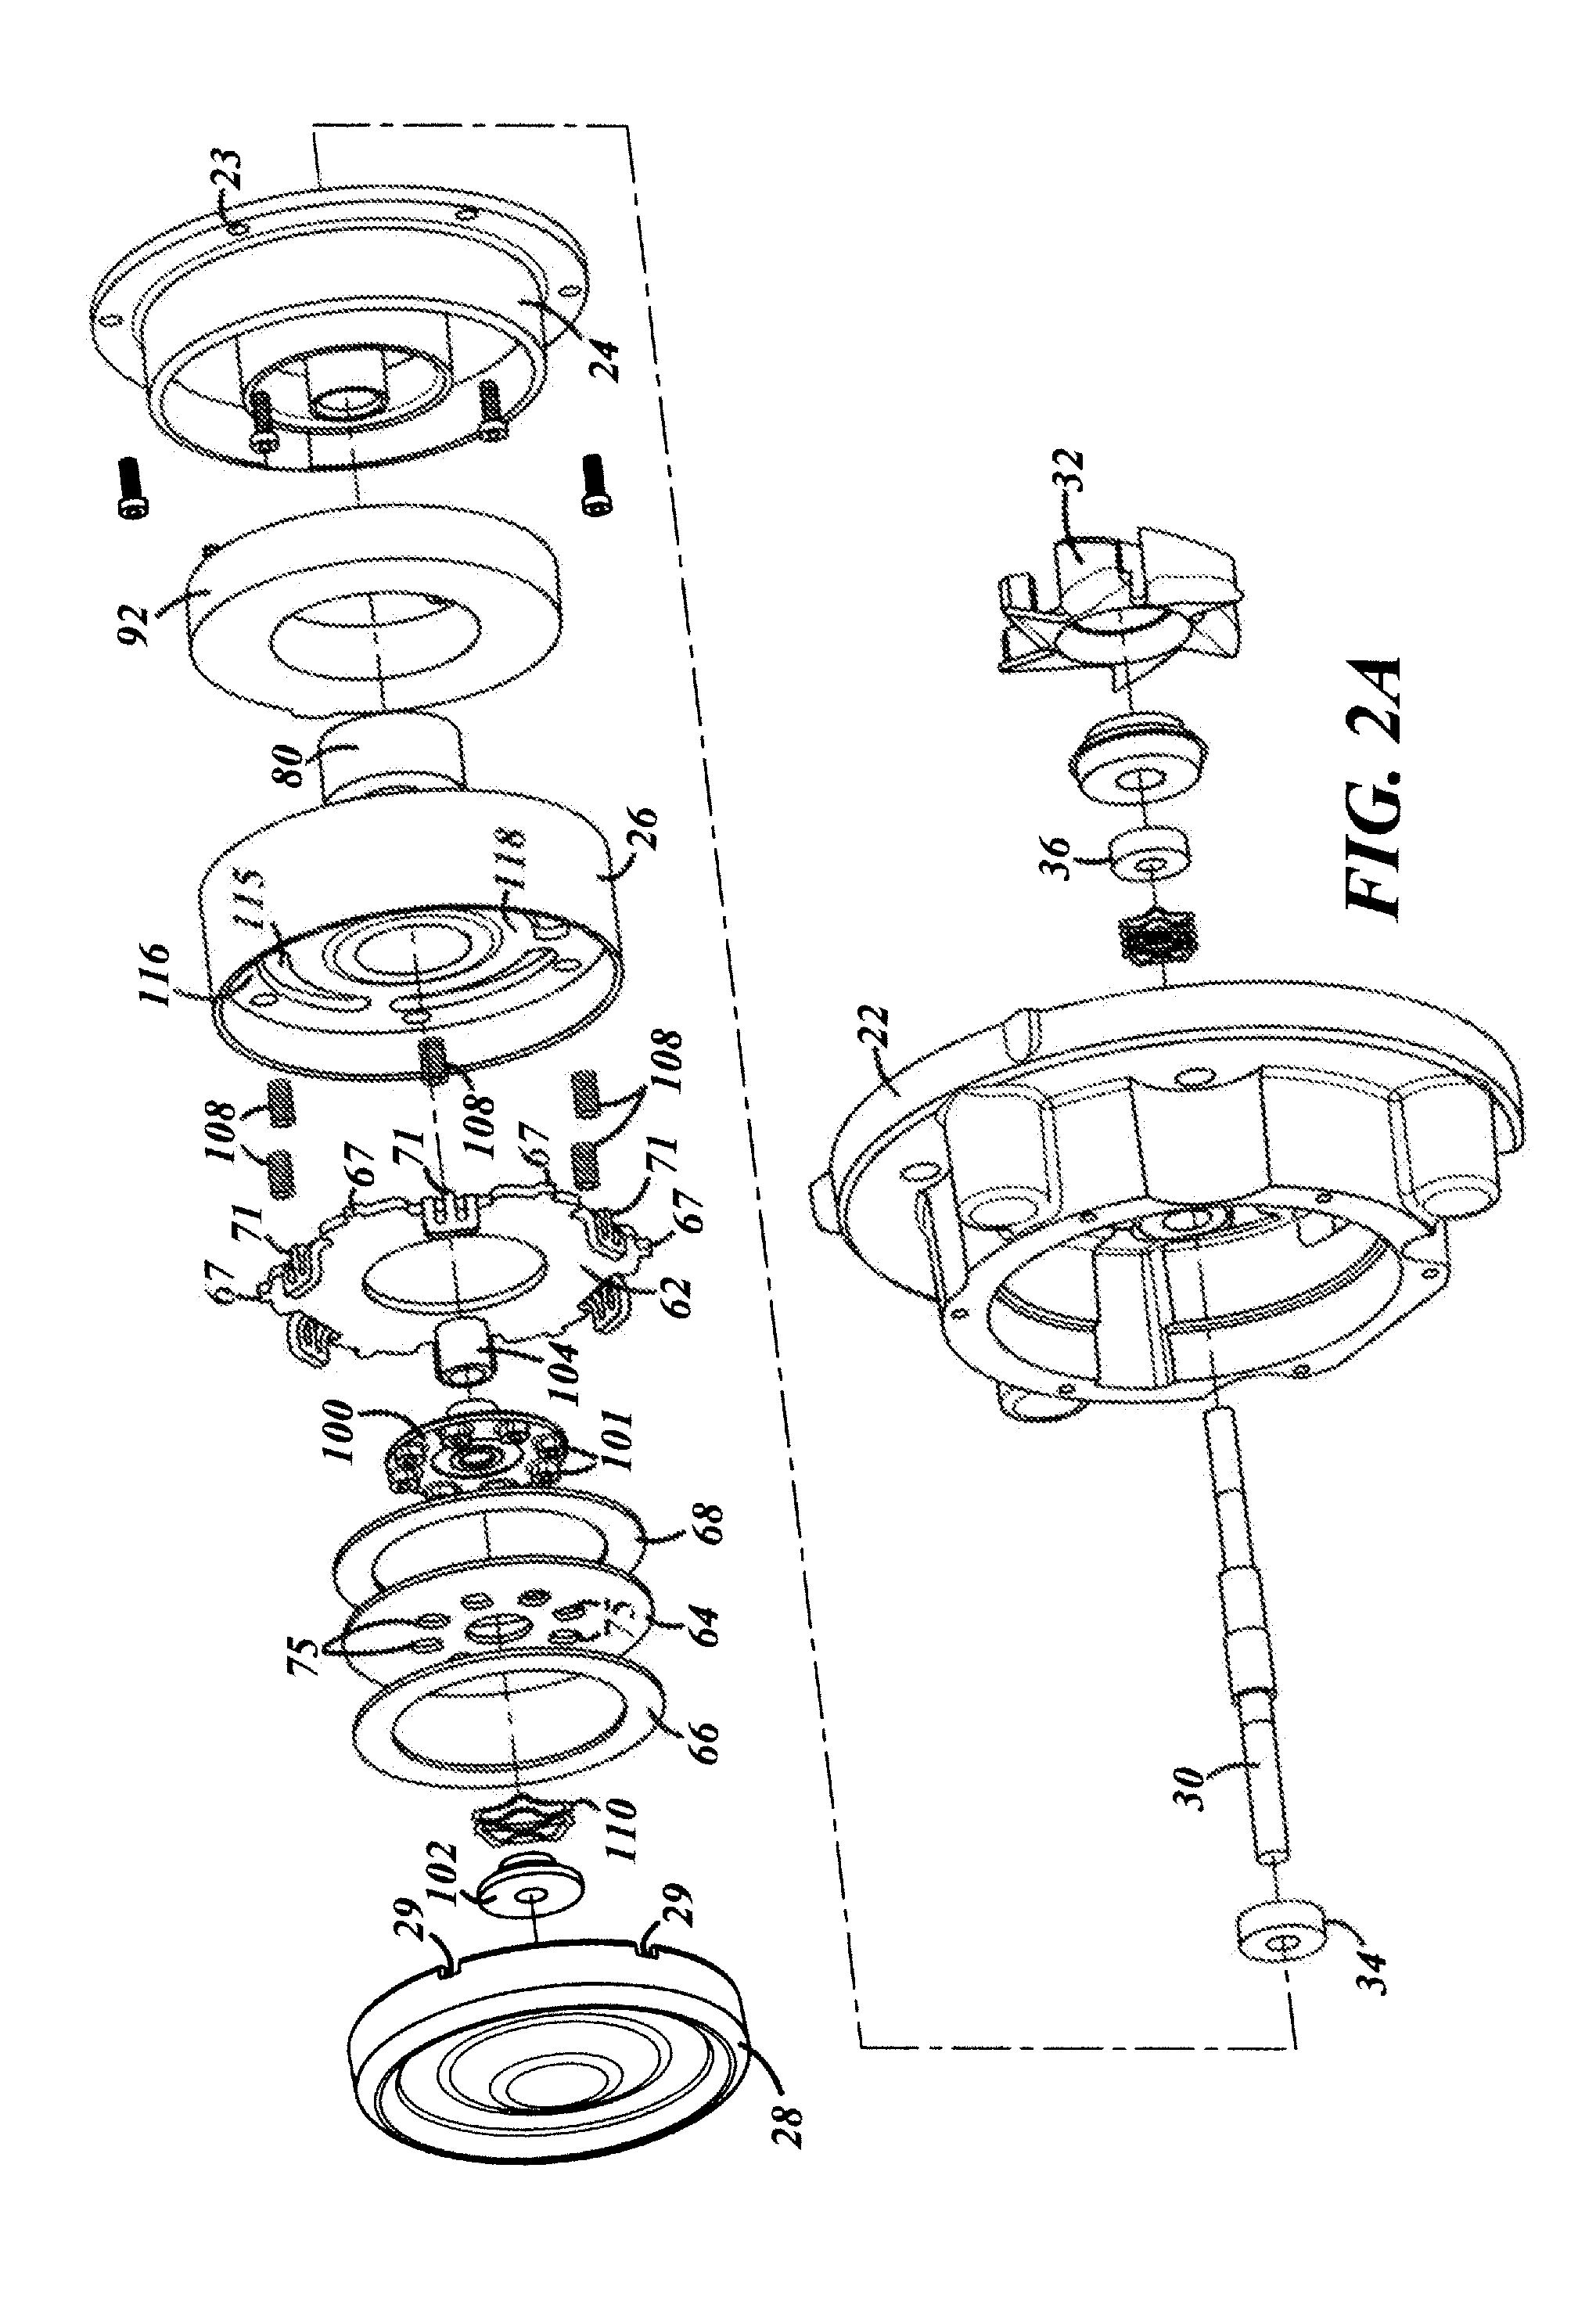 Accessory drive with friction clutch